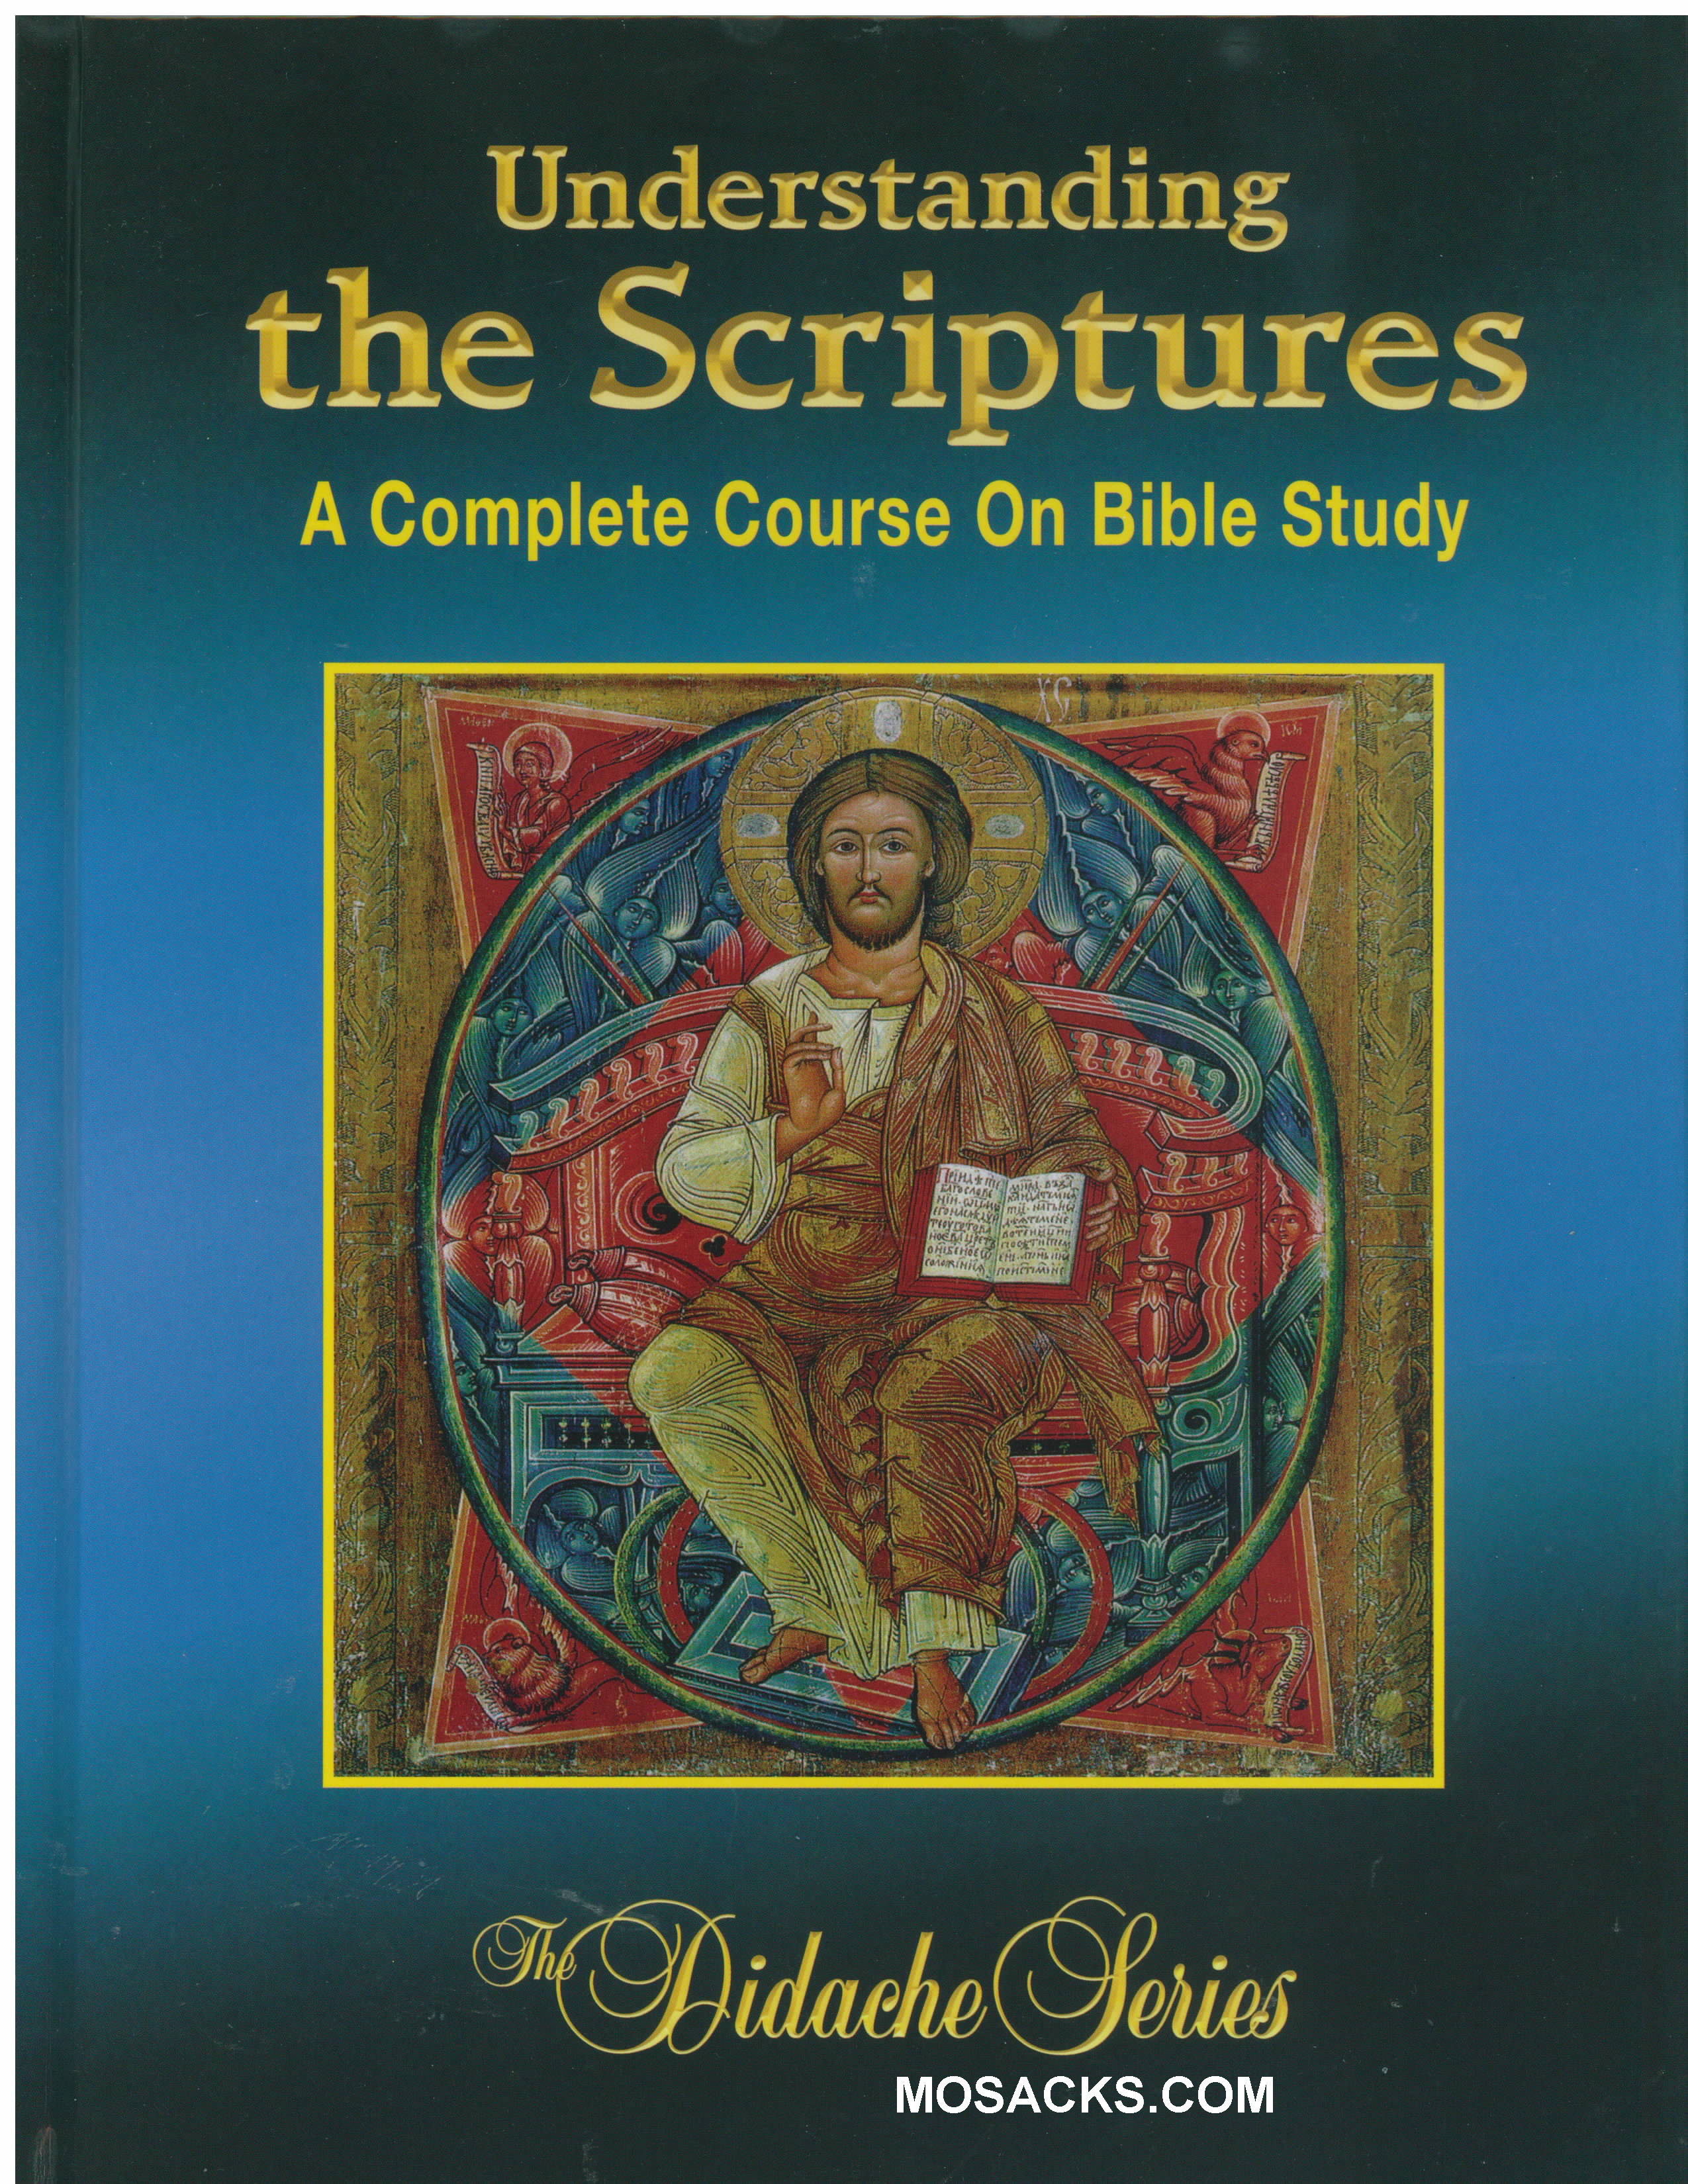 Didache Series Understanding the Scriptures: A Complete Course Hahn 77478